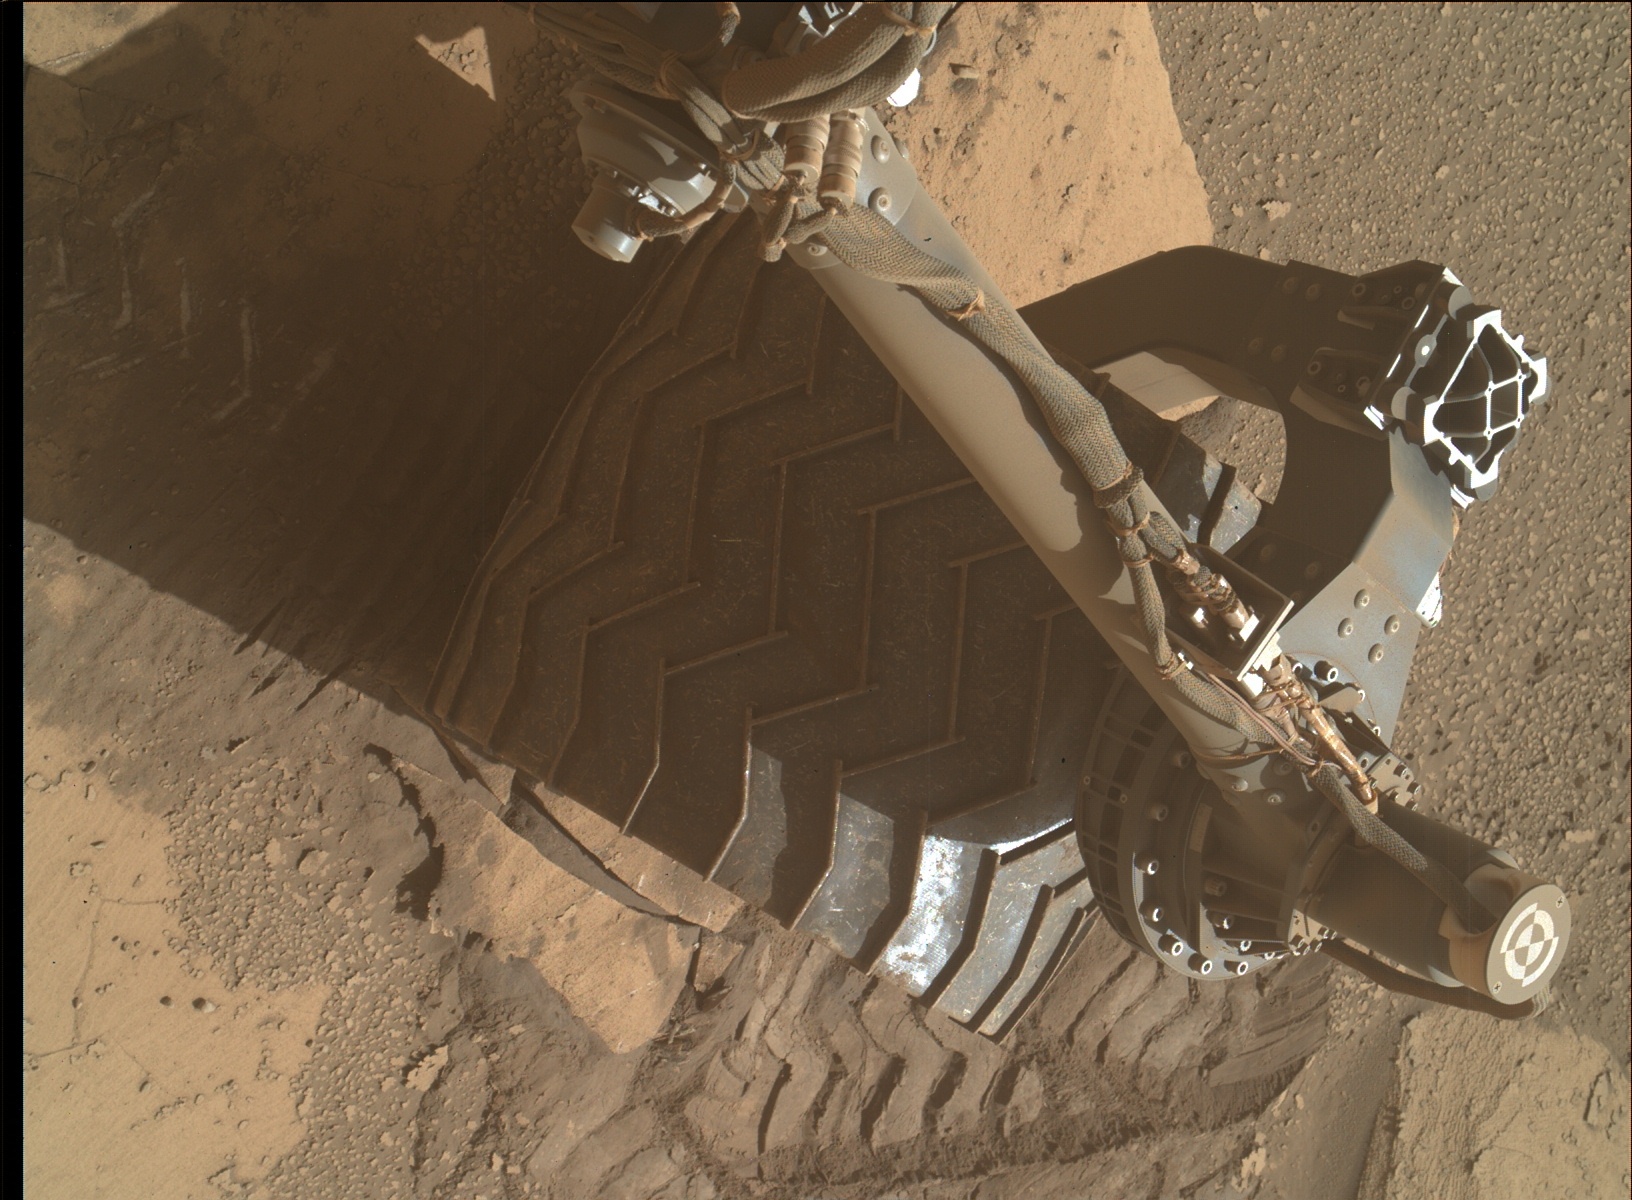 Nasa's Mars rover Curiosity acquired this image using its Mars Hand Lens Imager (MAHLI) on Sol 3878